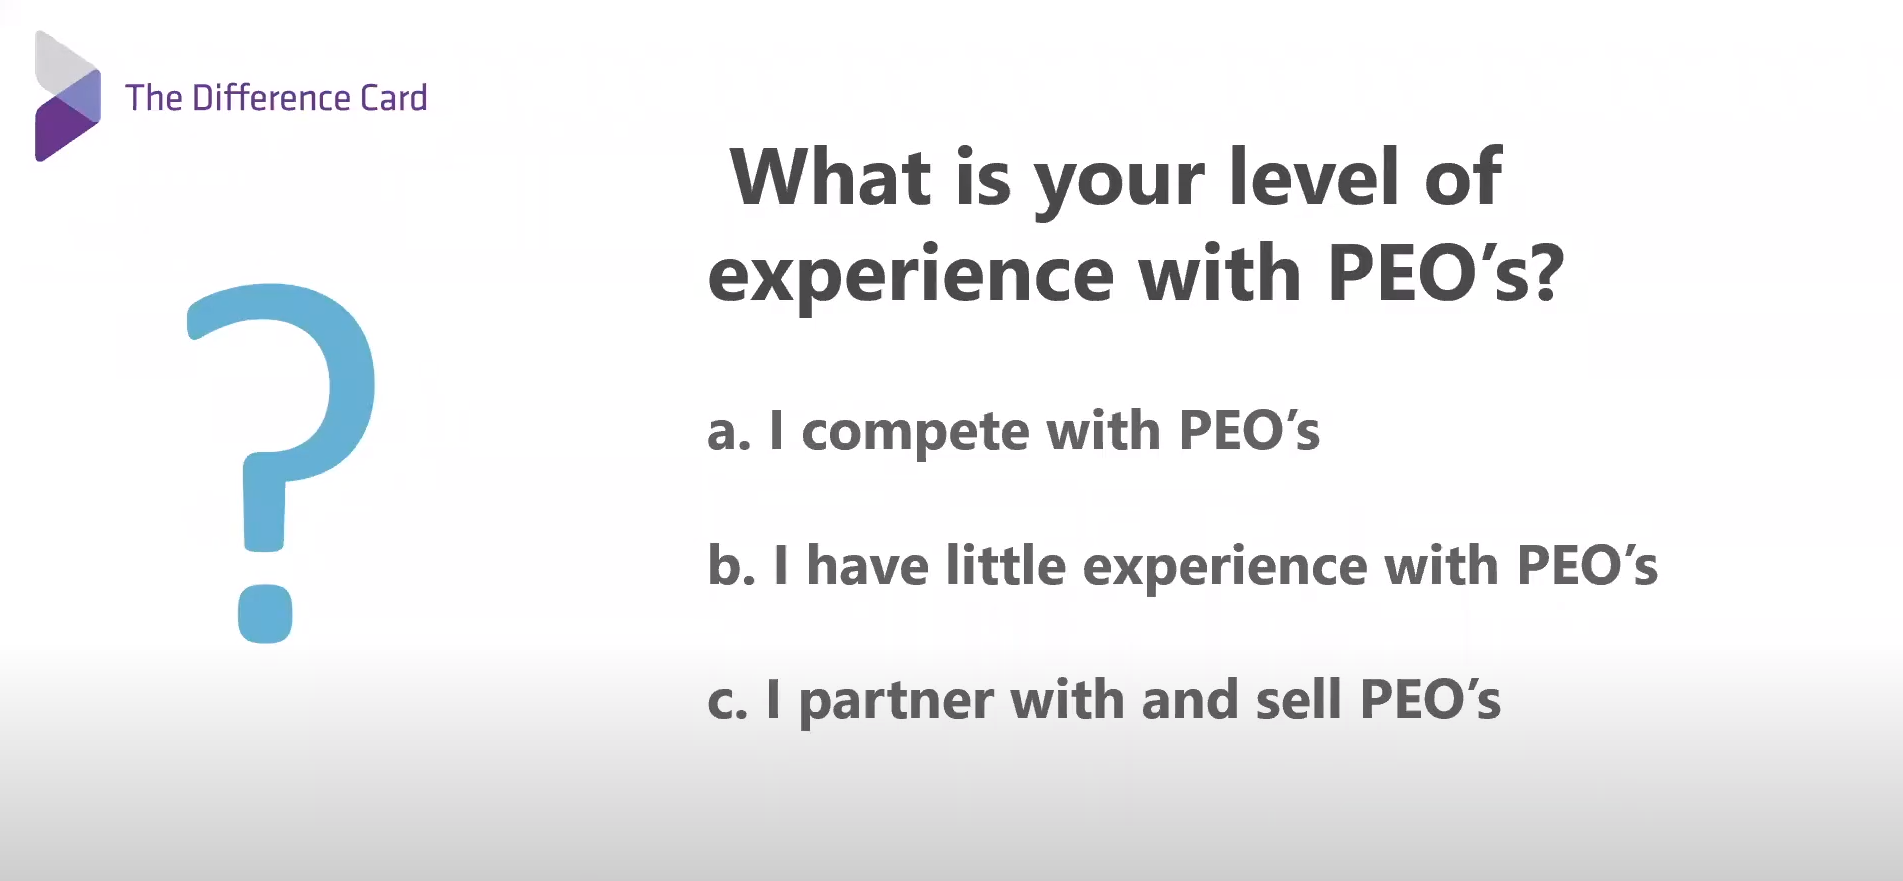 What is your experience with PEO's?